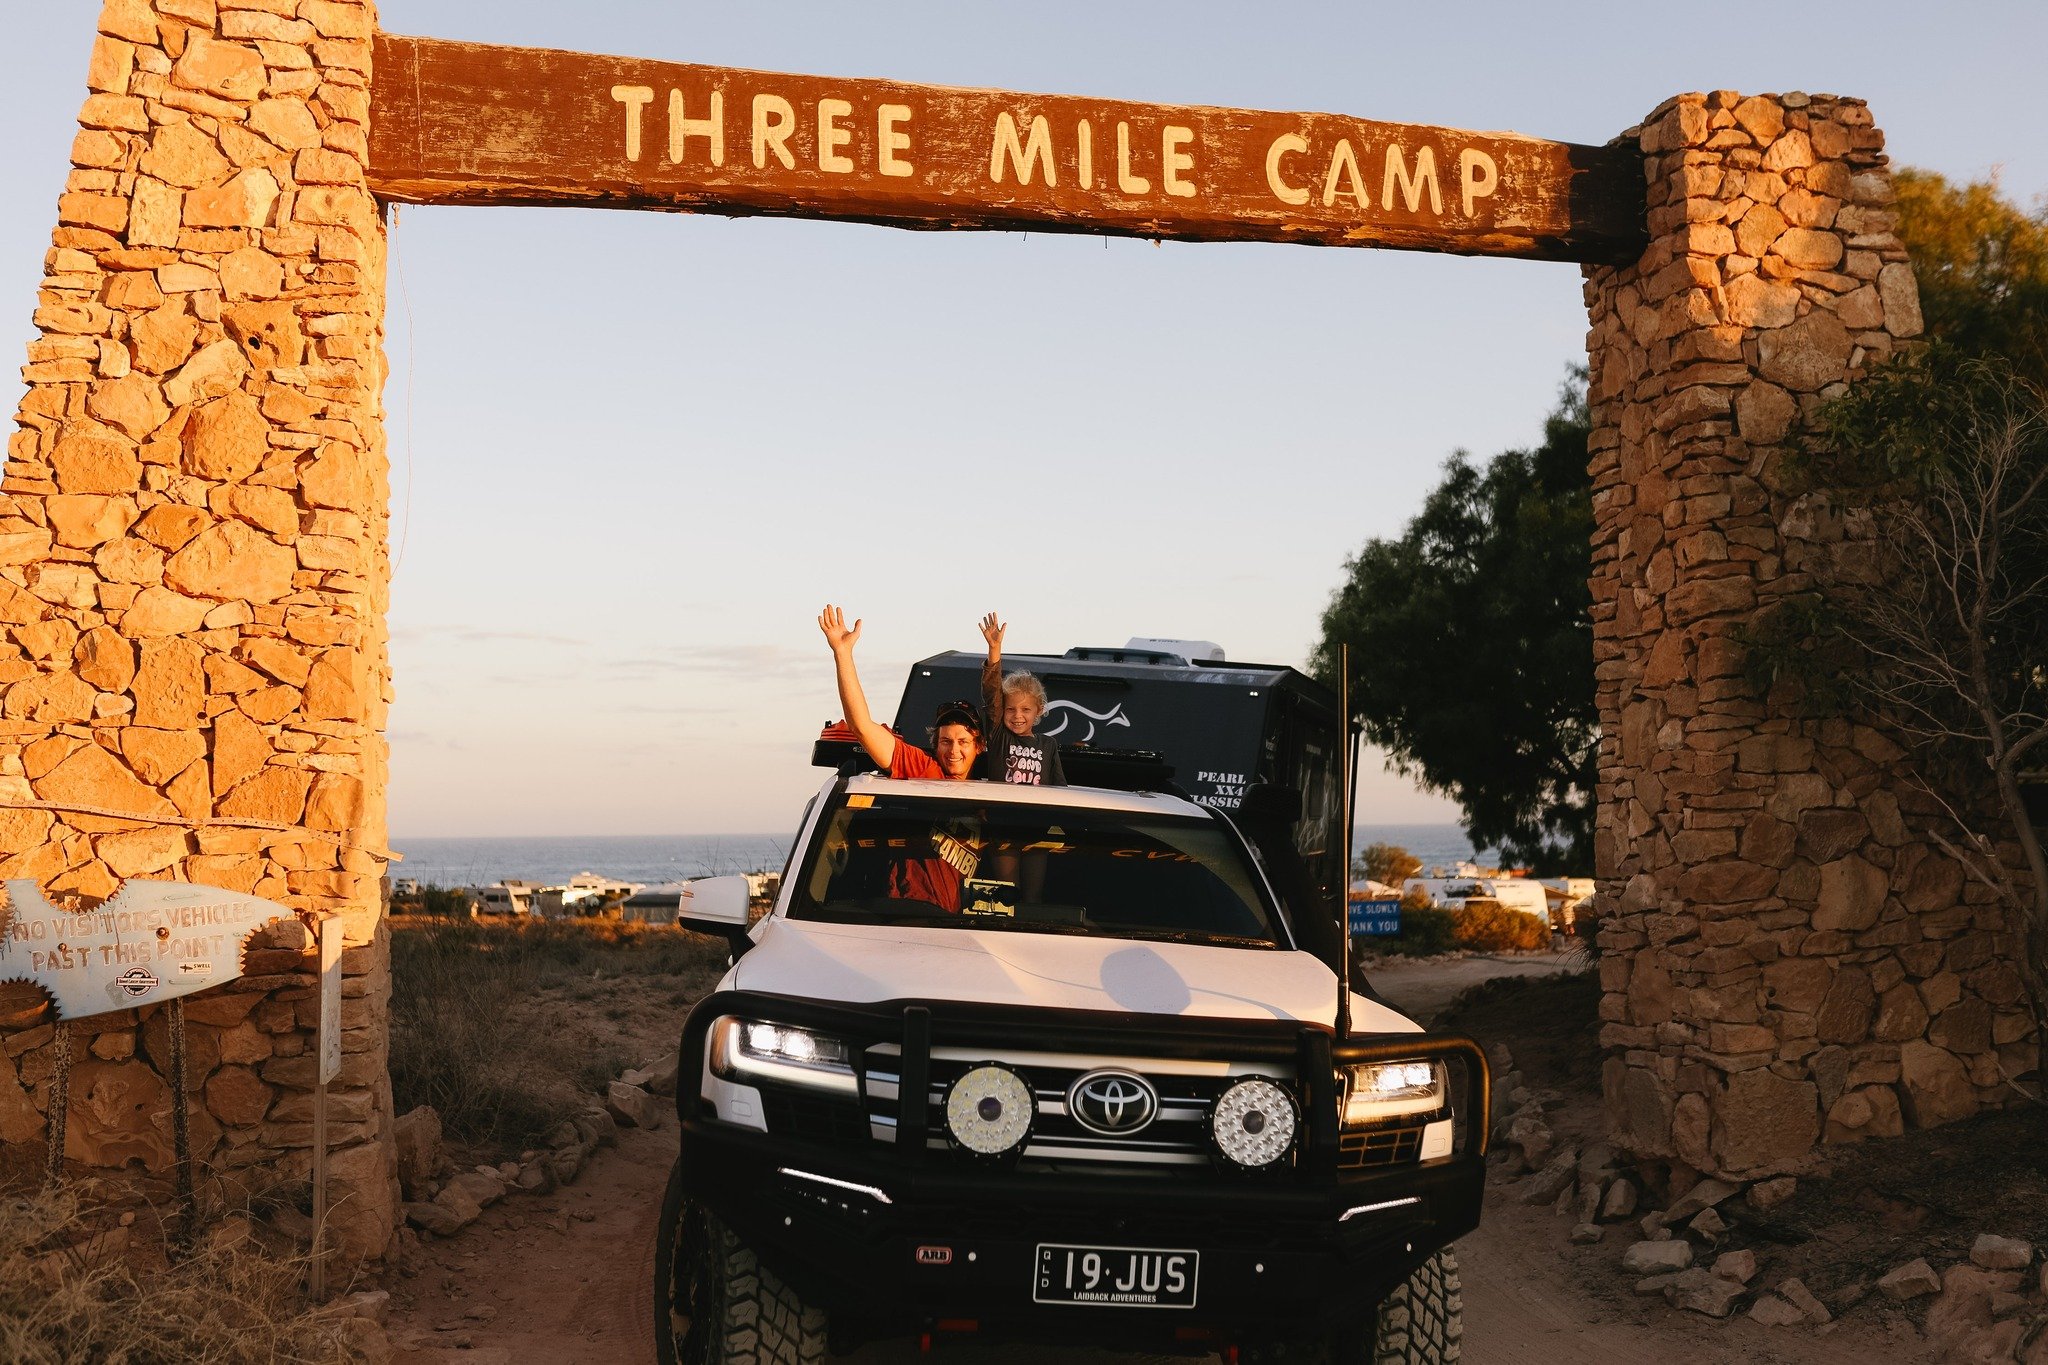 Gnaraloo bliss 🌊 a last minute addition to the itinerary, we hand&rsquo;t heard of this station until it was all the talk of the travellers that we got FOMO and squeezed it in. SAVE if you you think you&rsquo;d enjoy it too!

@gnaraloostation 3 MILE